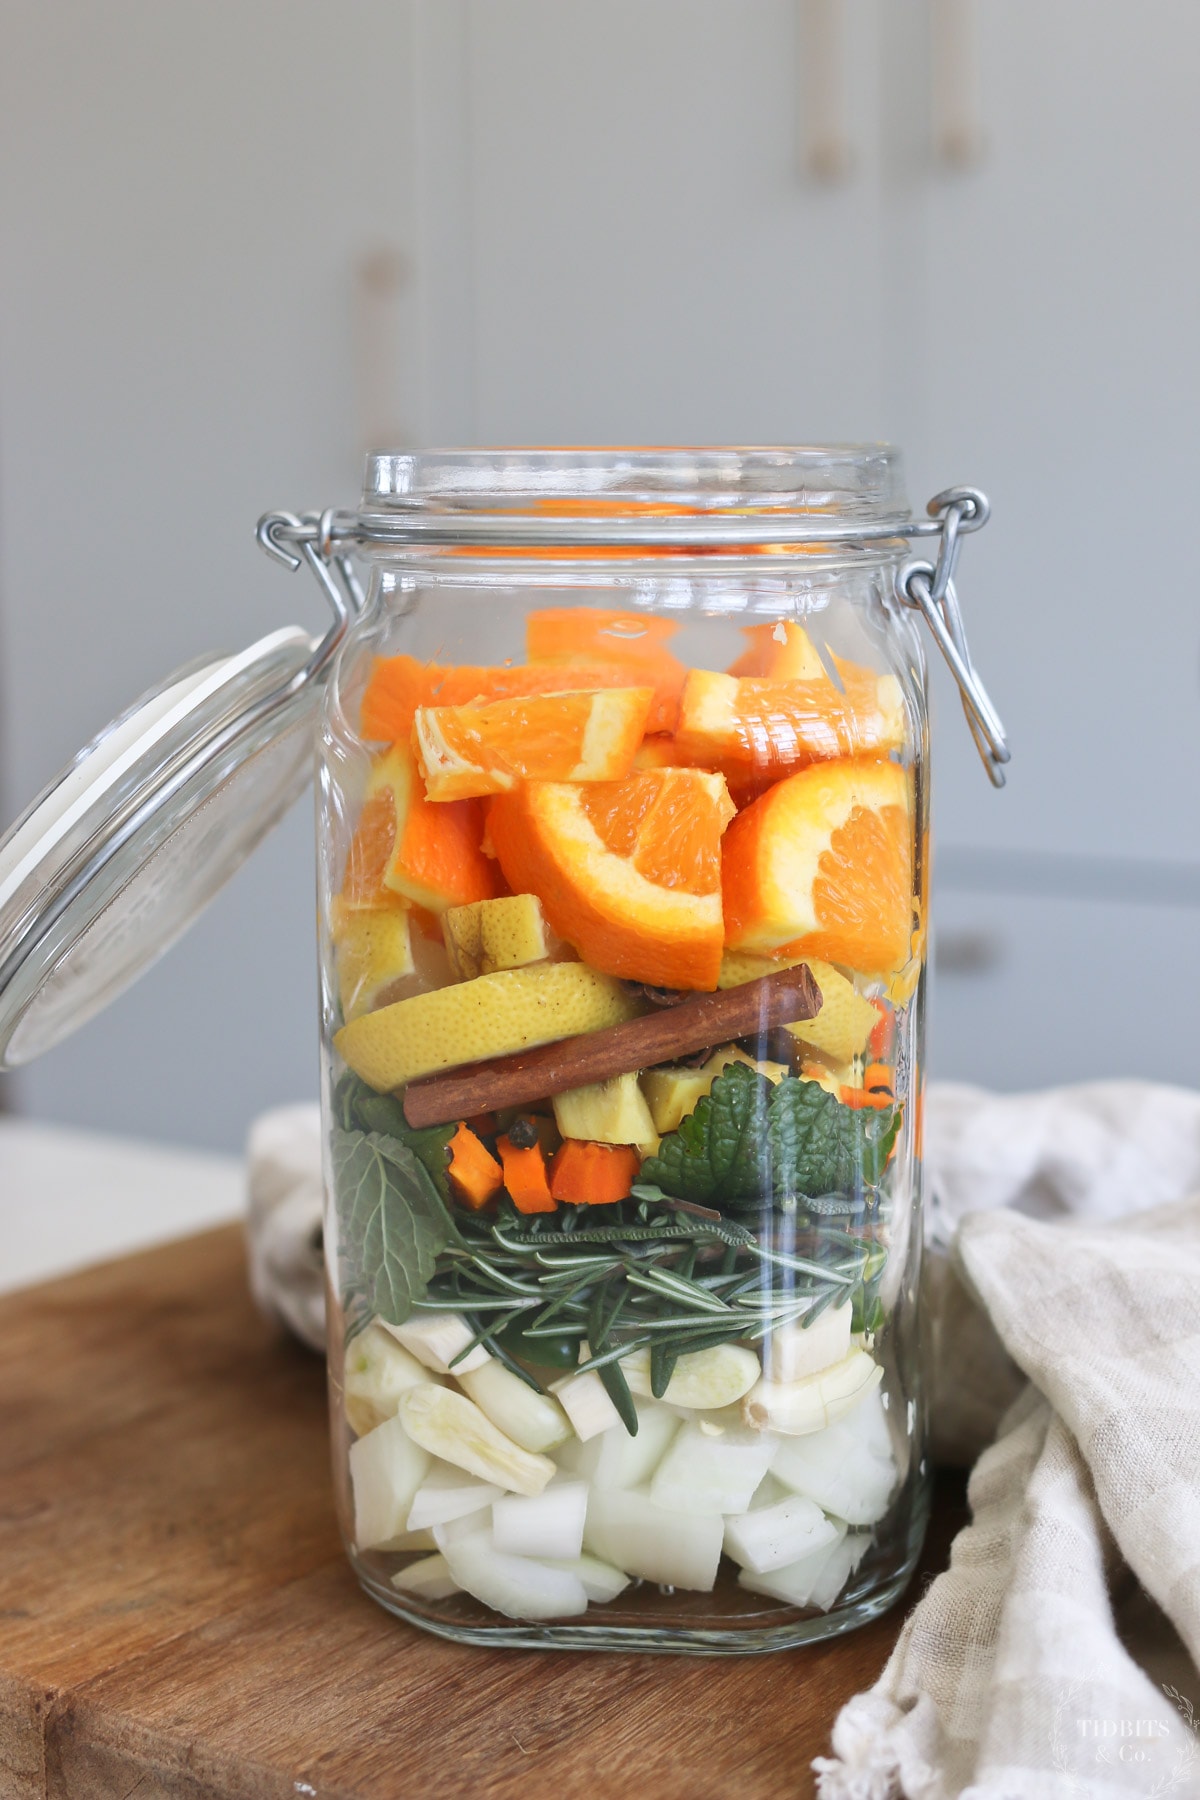 An open glass jar filled with layers of fruits, vegetables and herbs.